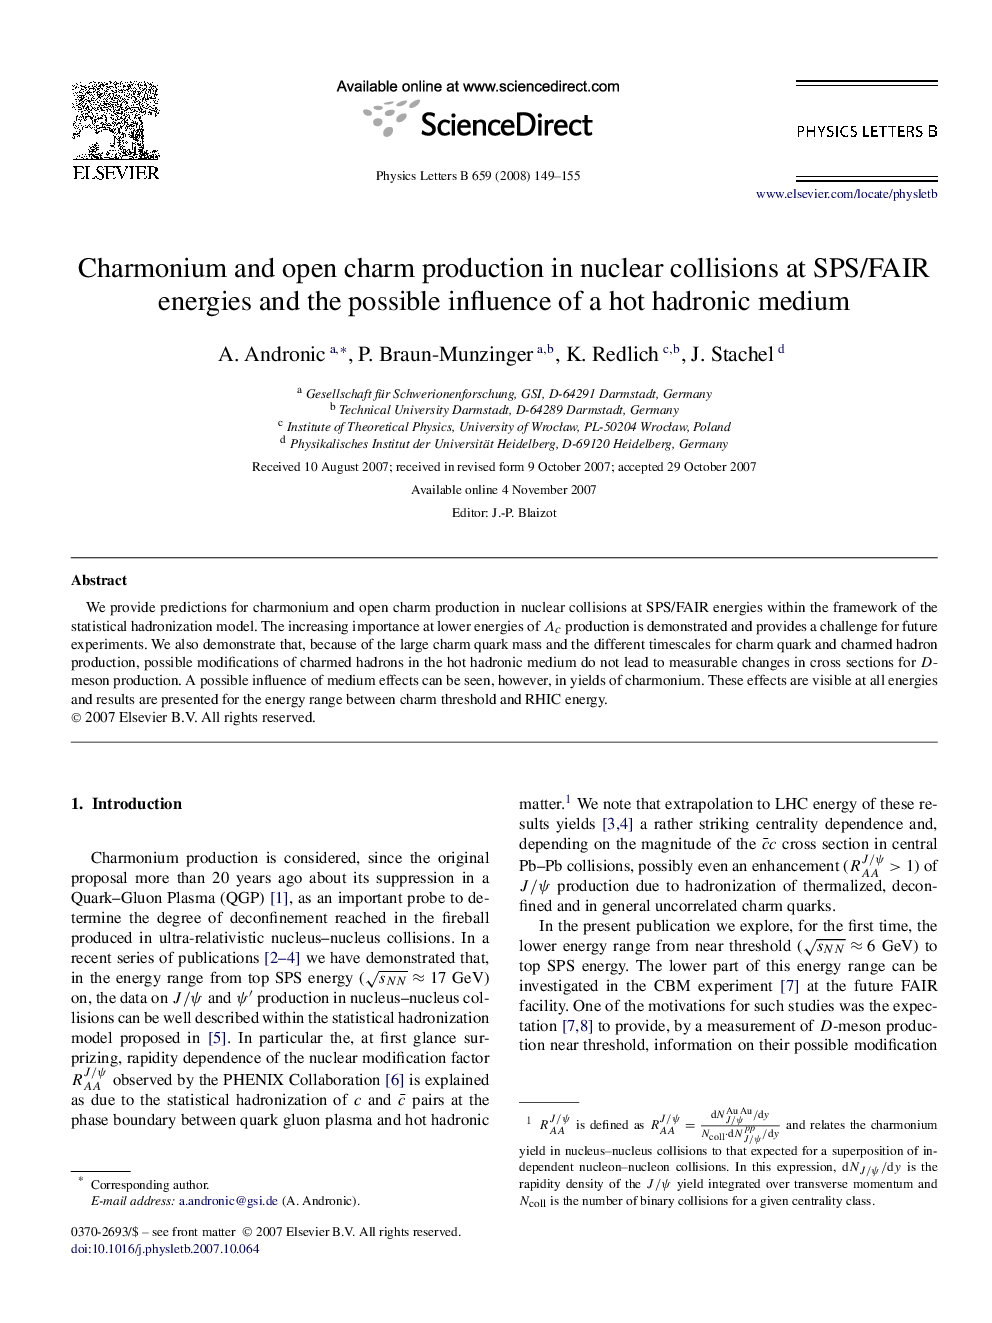 Charmonium and open charm production in nuclear collisions at SPS/FAIR energies and the possible influence of a hot hadronic medium